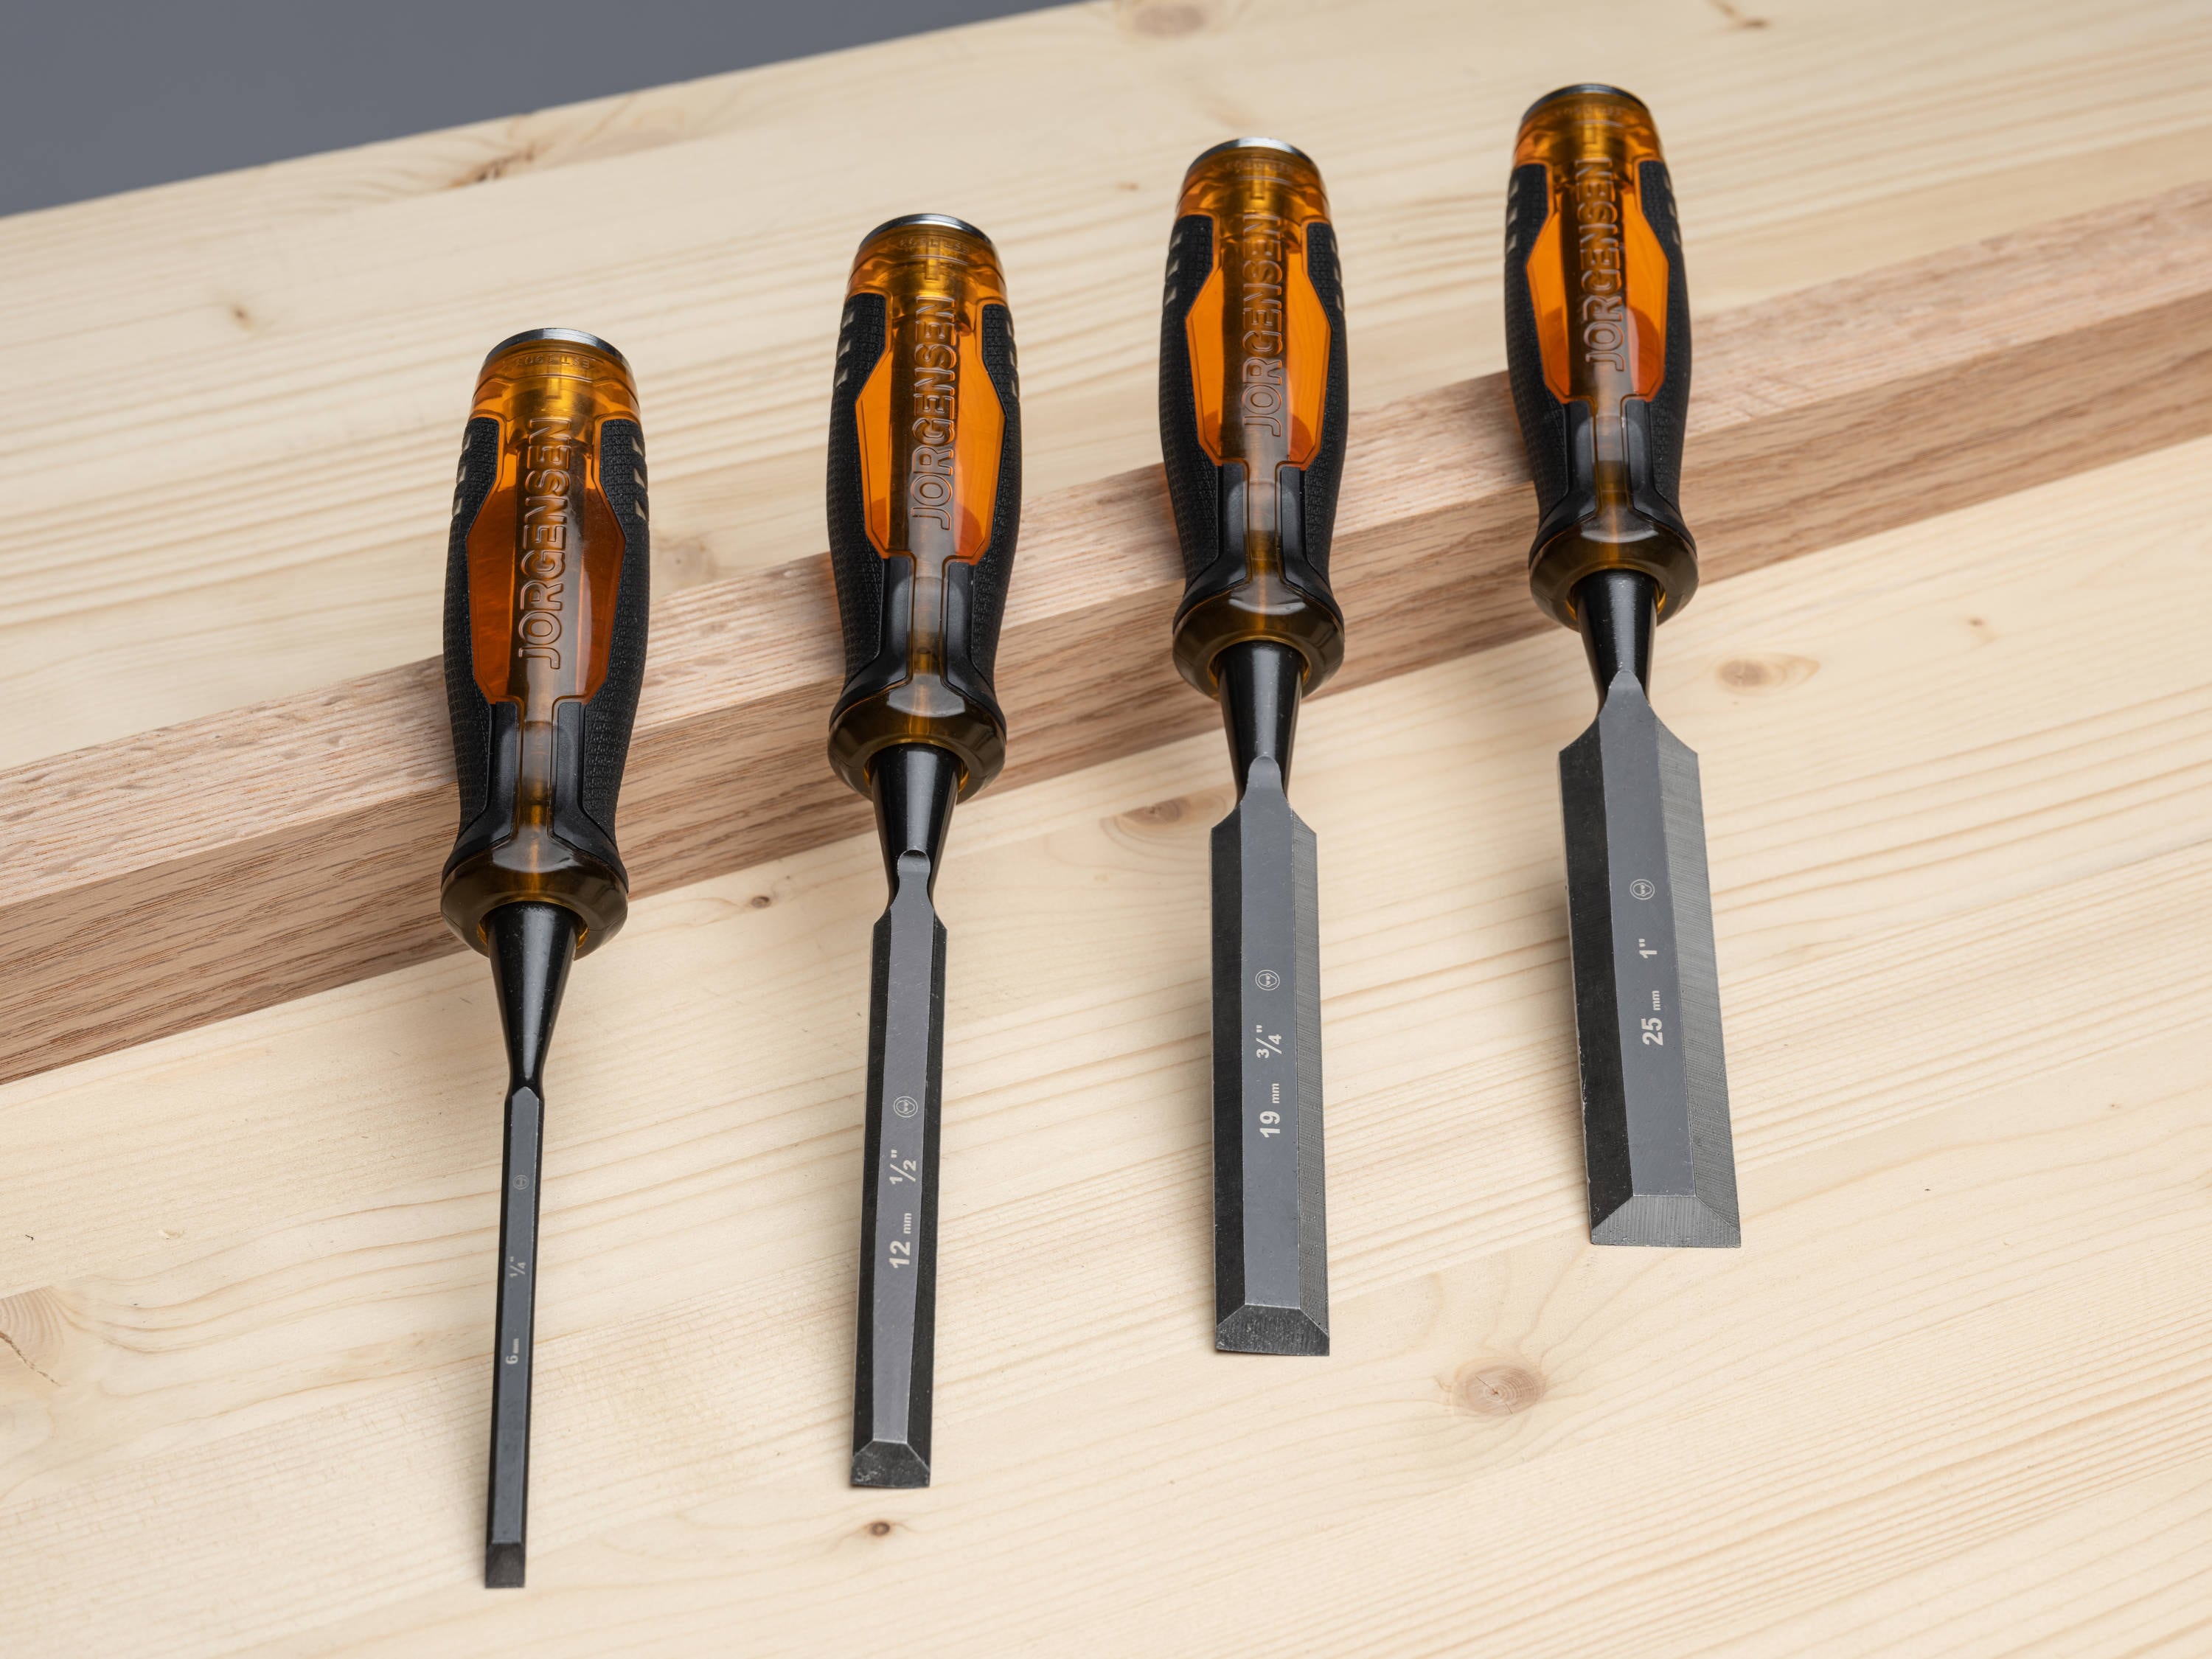 Wooden Woodworking Chisels, Luban Woodworking Tools, Wooden Chisel Set